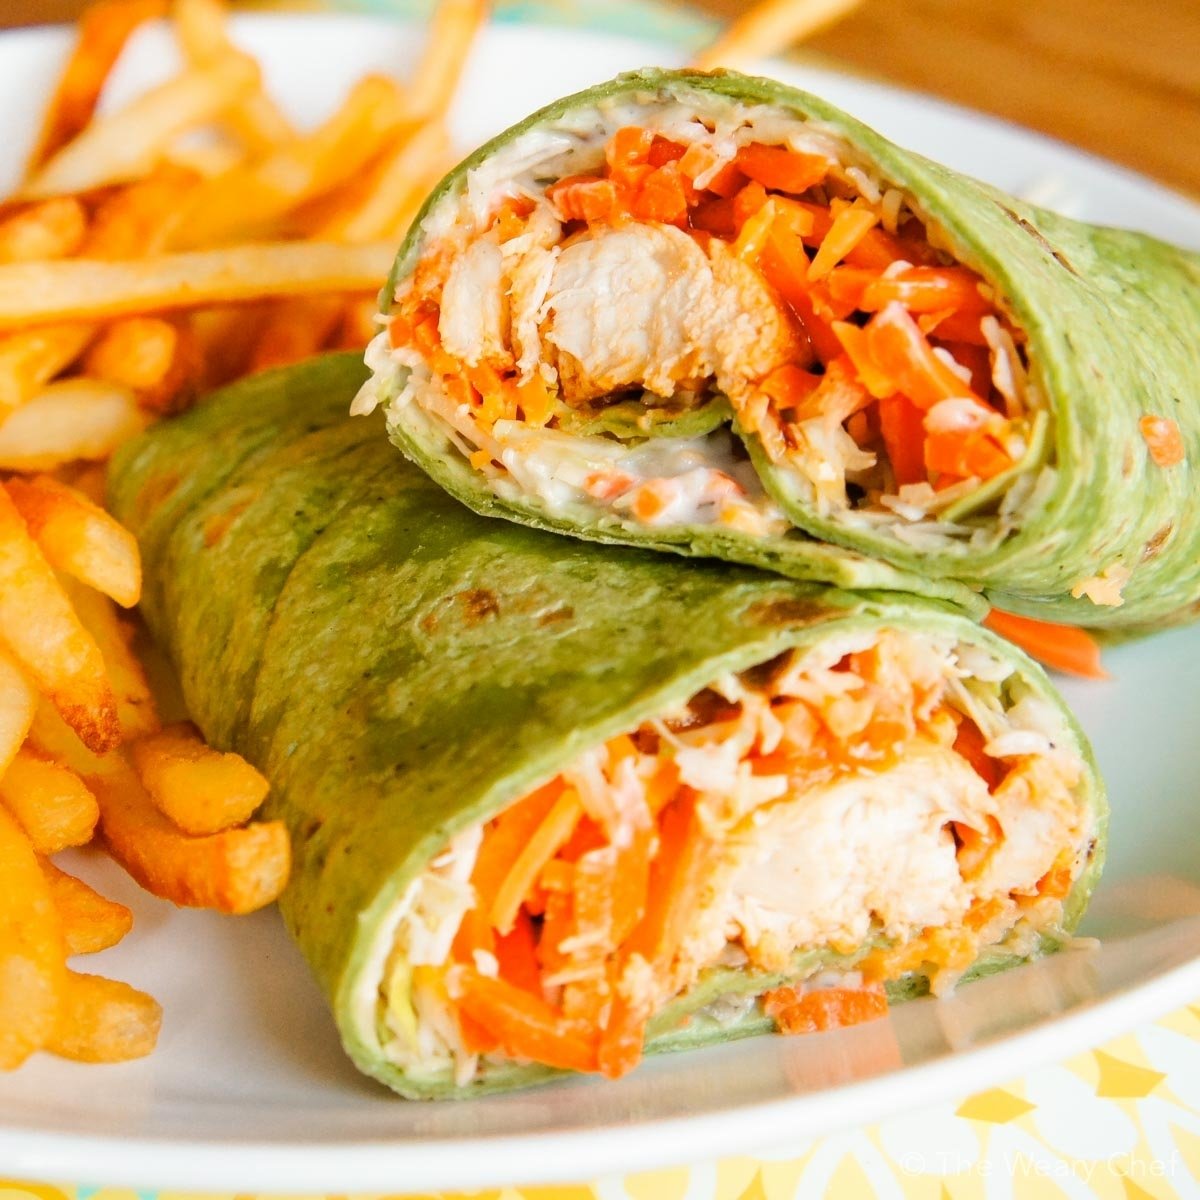 10 Lovely Good Dinner Ideas With Chicken buffalo chicken wraps a fun and tasty dinner idea the weary chef 7 2022